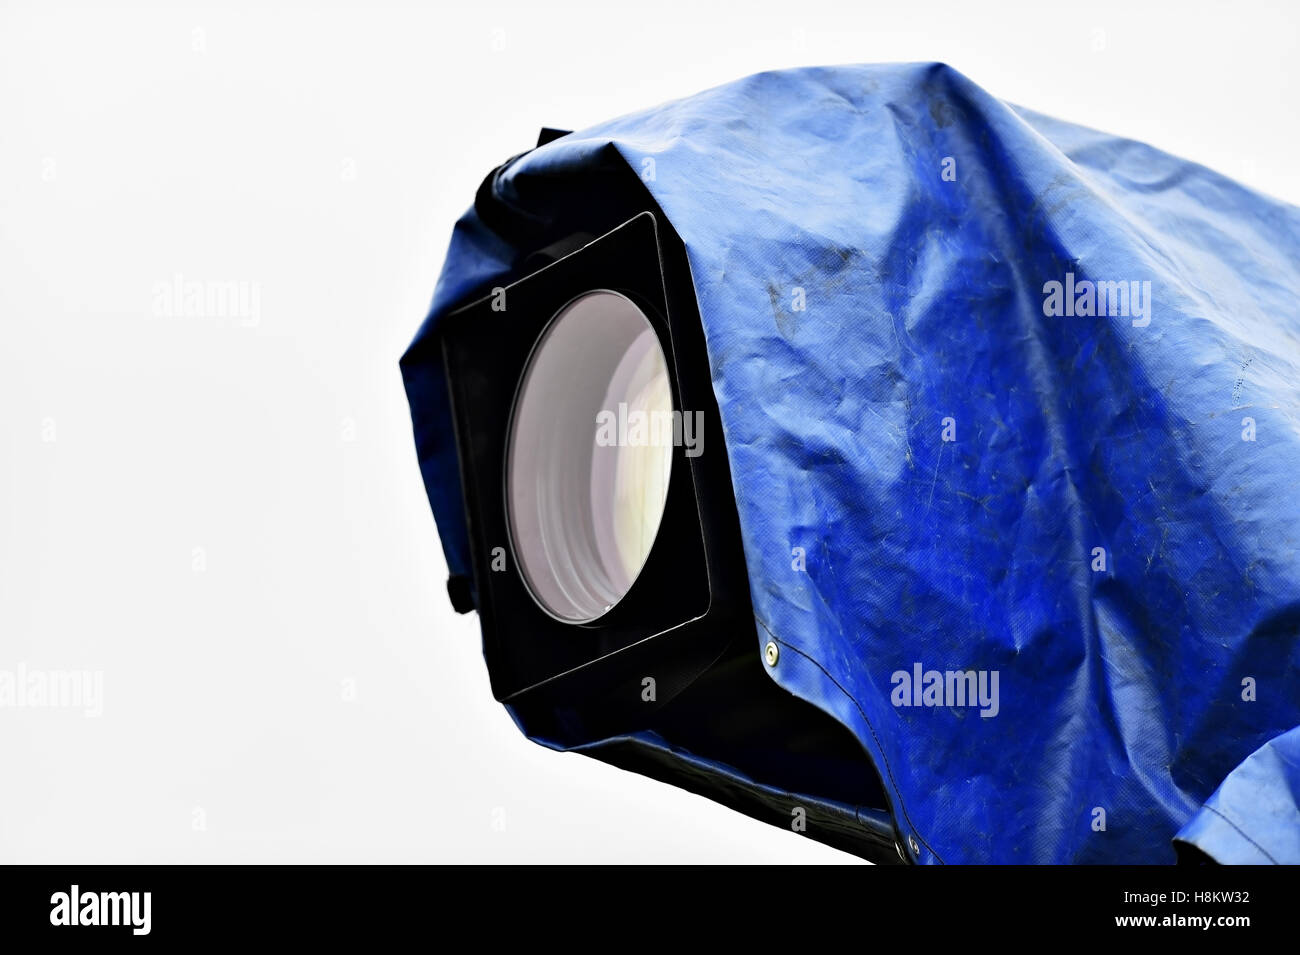 Television news camera on a tripod protected by a blue rain cover Stock Photo